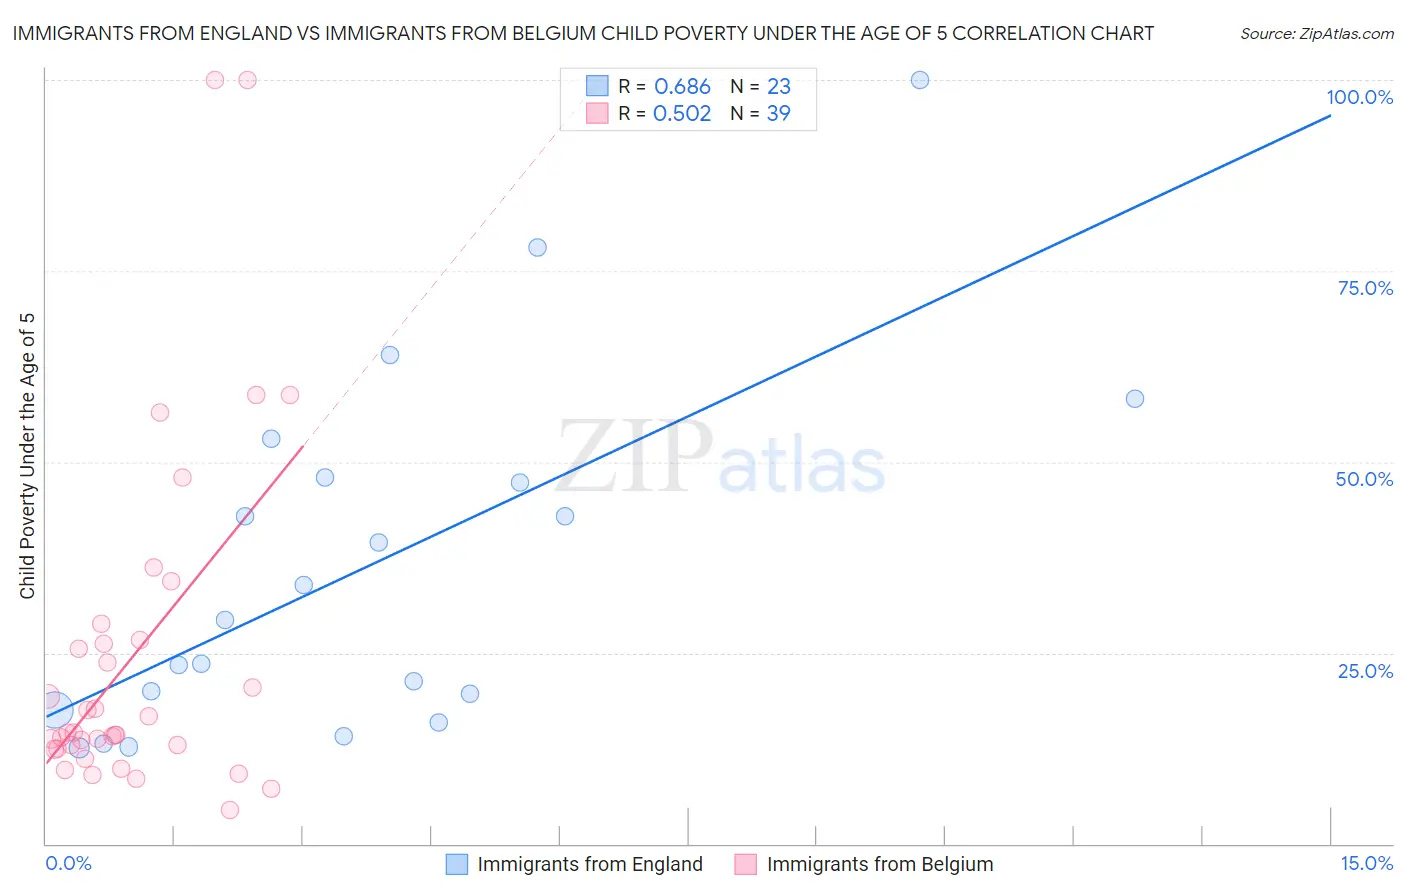 Immigrants from England vs Immigrants from Belgium Child Poverty Under the Age of 5